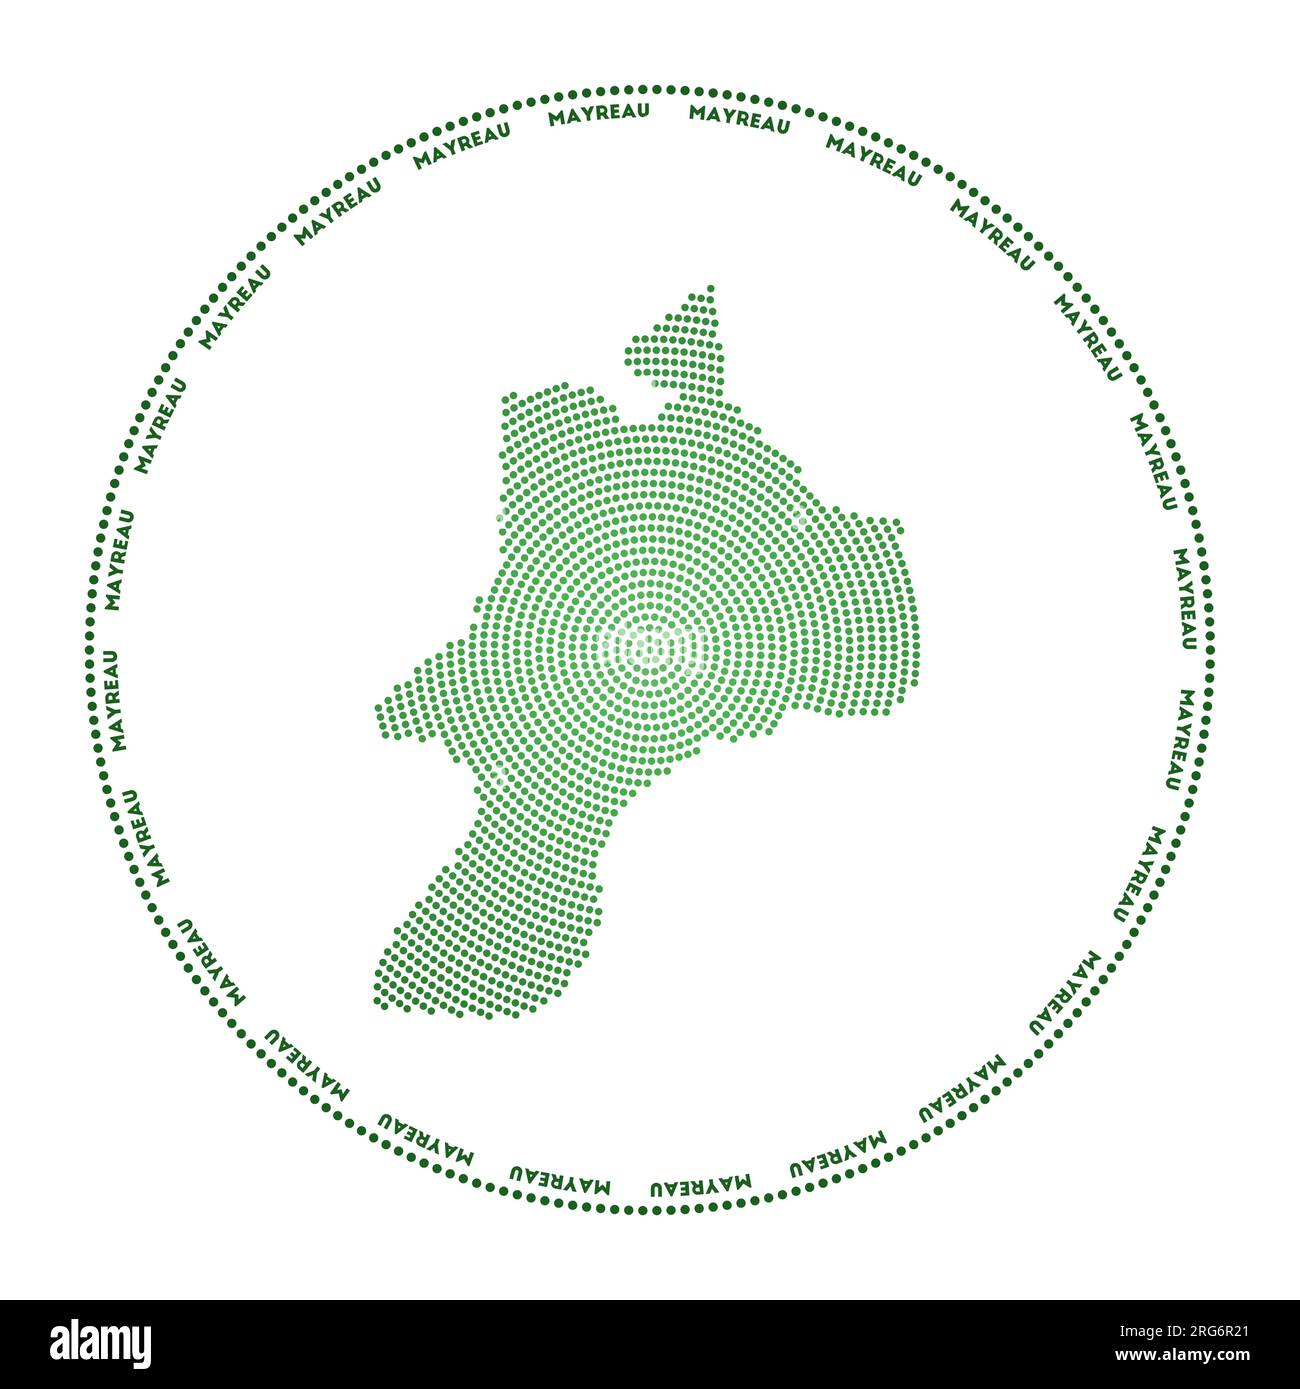 Mayreau round logo. Digital style shape of Mayreau in dotted circle with island name. Tech icon of the island with gradiented dots. Modern vector illu Stock Vector